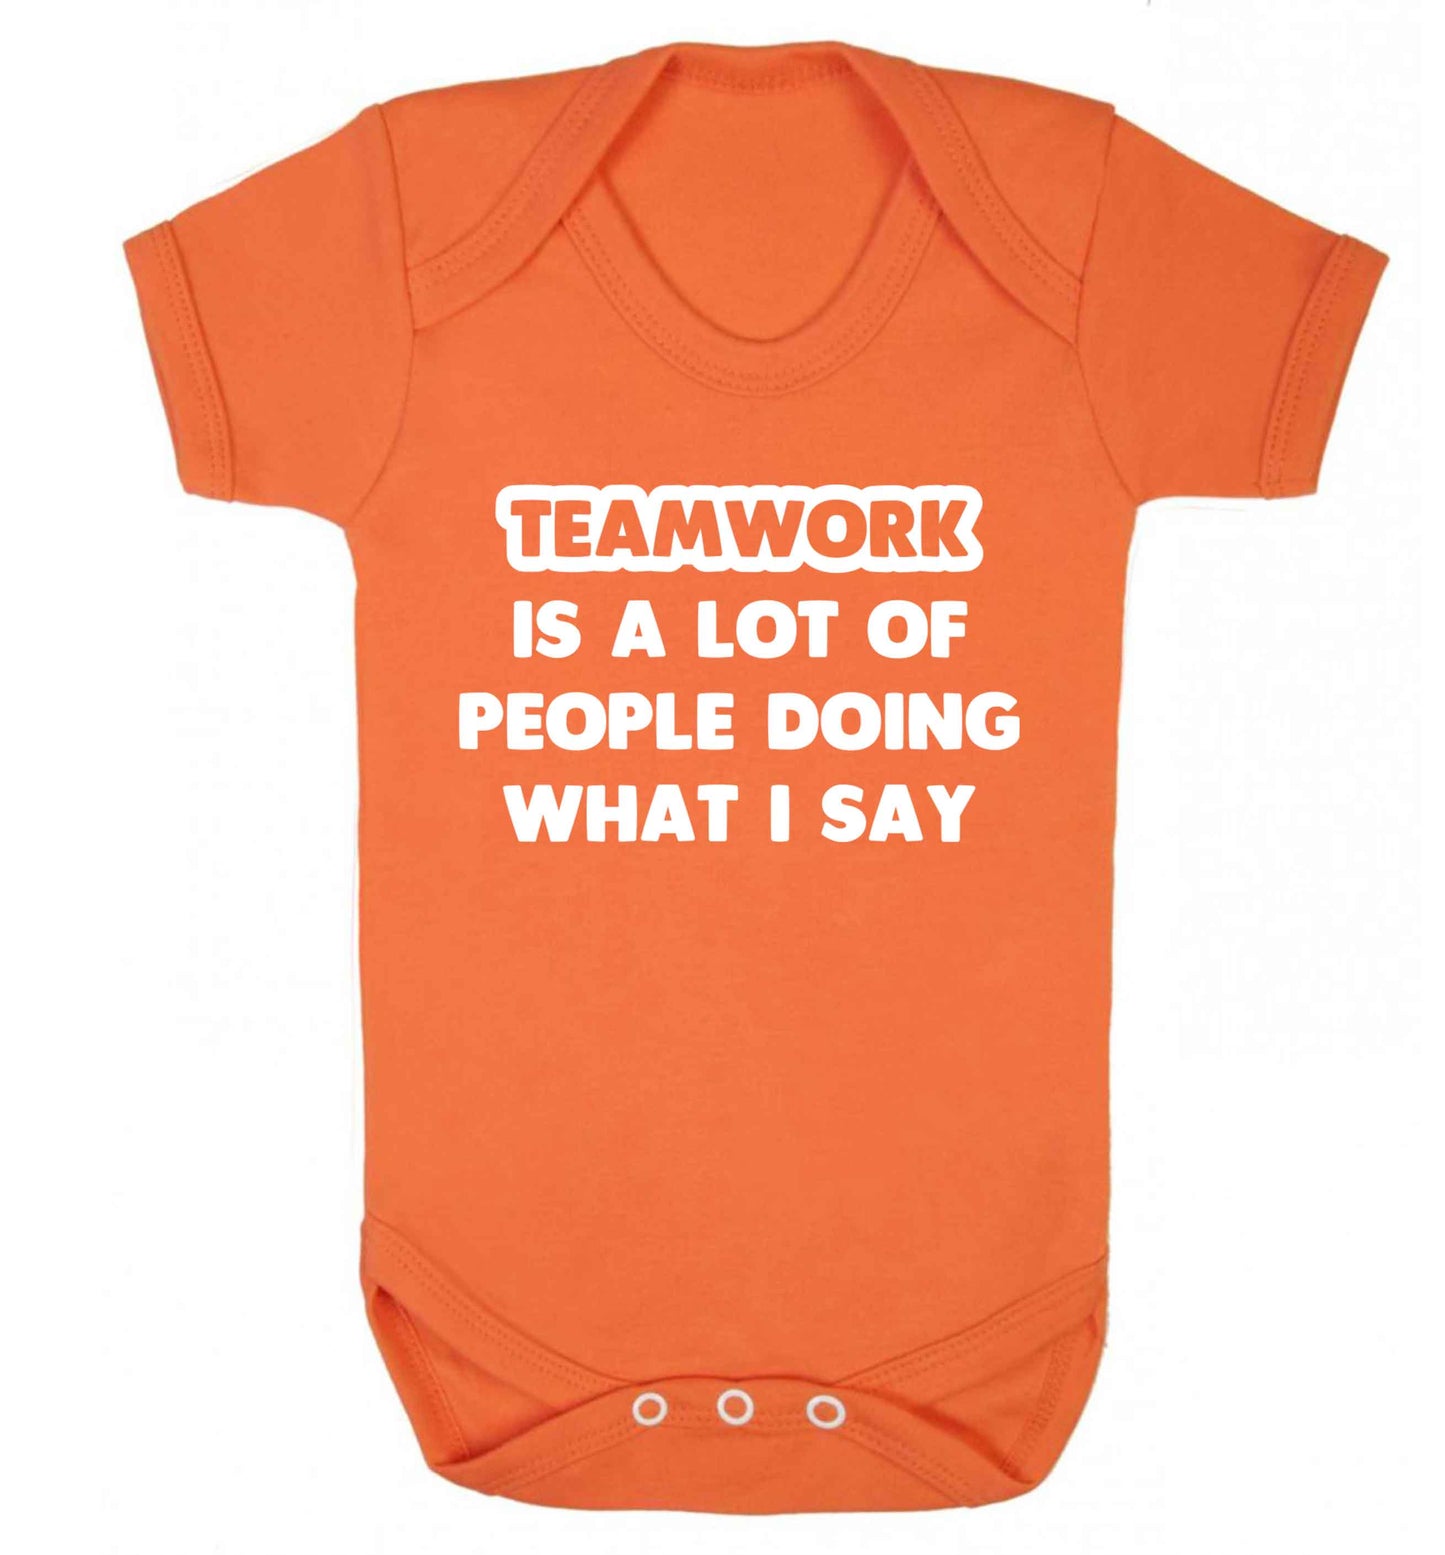 Teamwork is a lot of people doing what I say Baby Vest orange 18-24 months